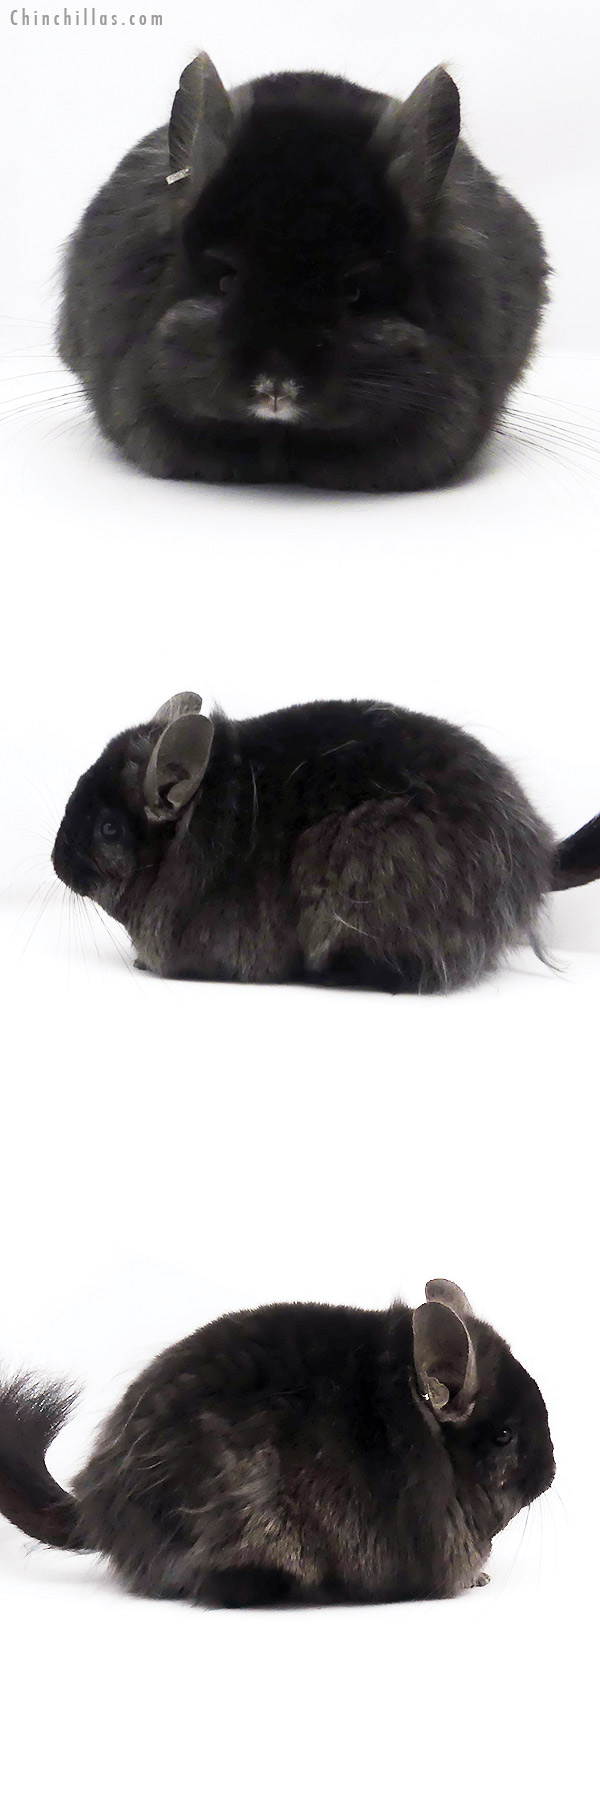 Chinchilla or related item offered for sale or export on Chinchillas.com - 19345 Ebony ( Locken Carrier ) G2  Royal Persian Angora Female Chinchilla